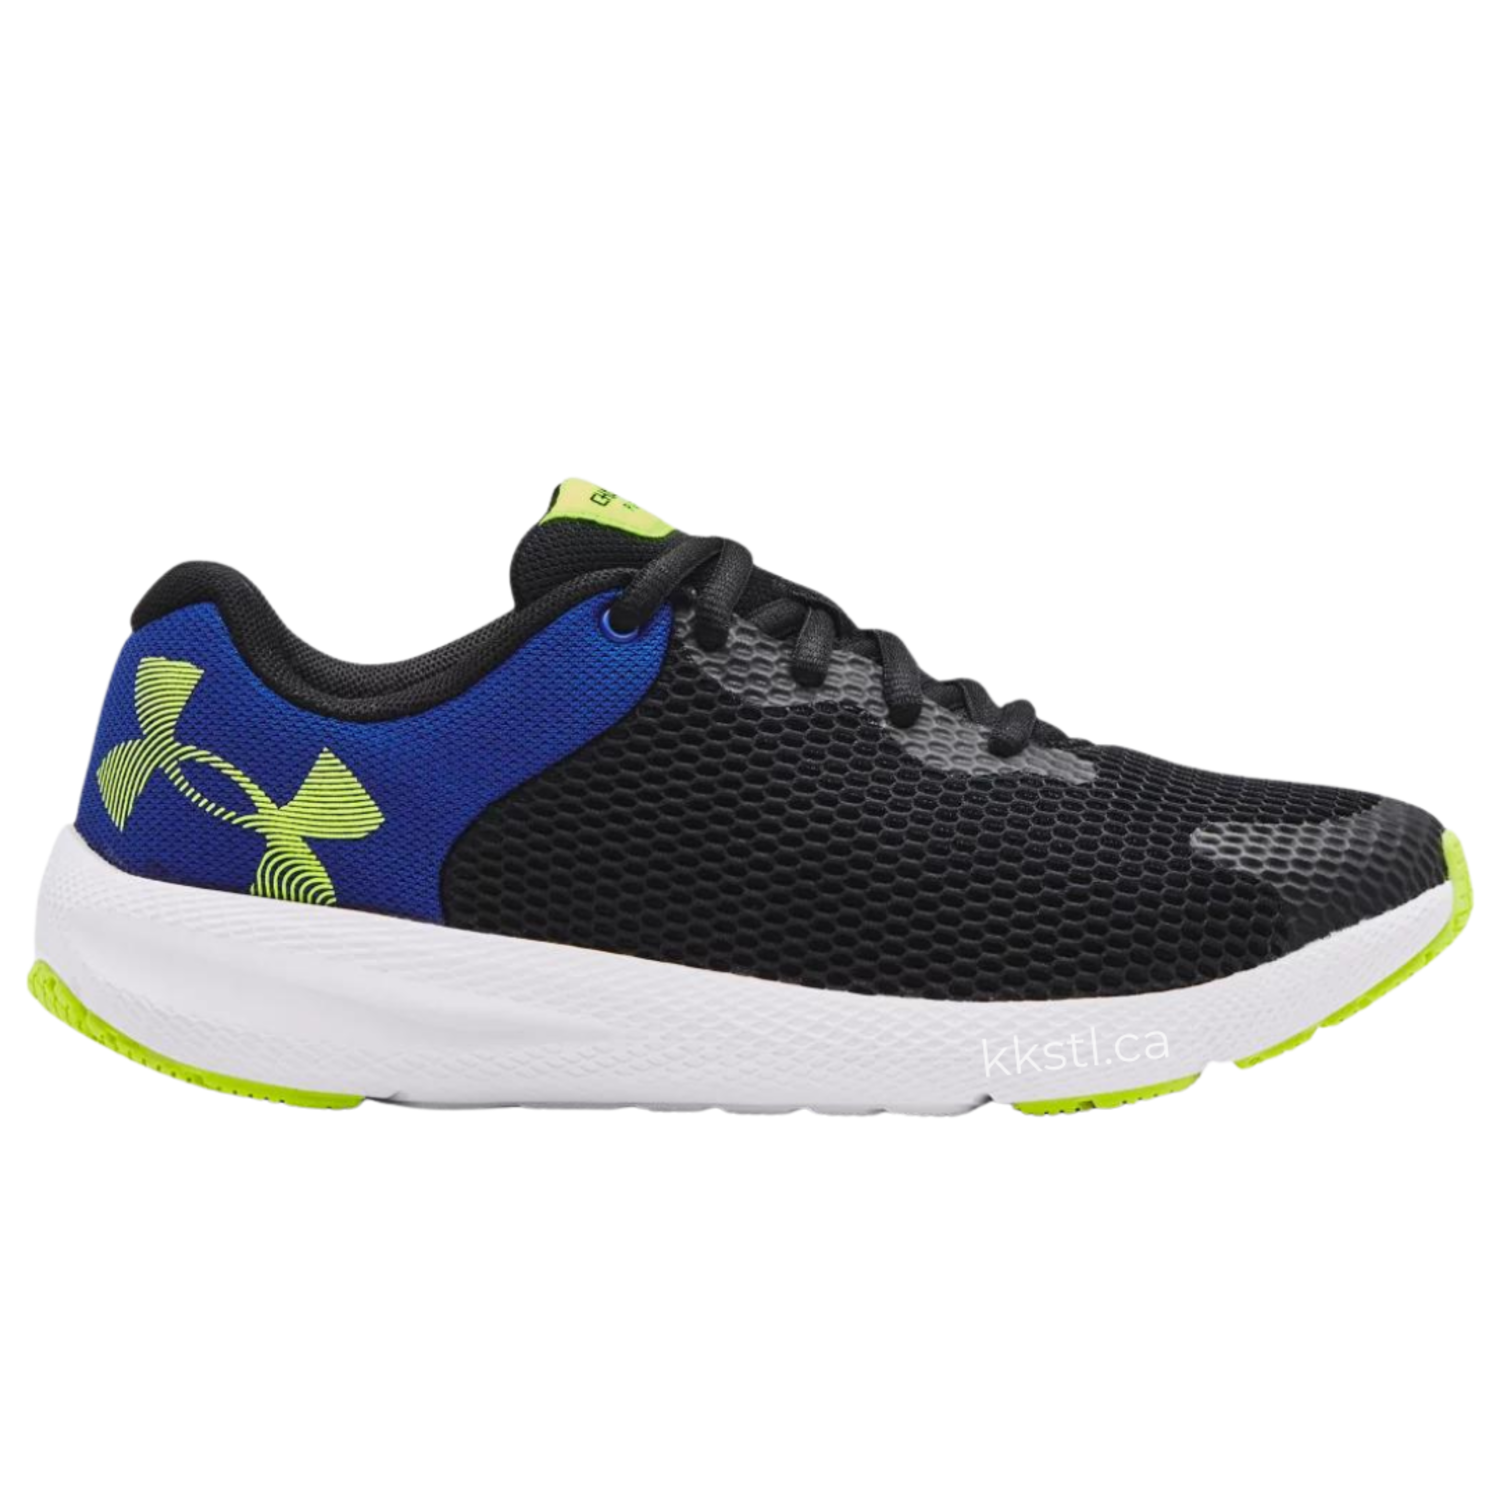  Under Armour Women's Charged Pursuit 2 Running Shoe, Black  (002)/Black, 5